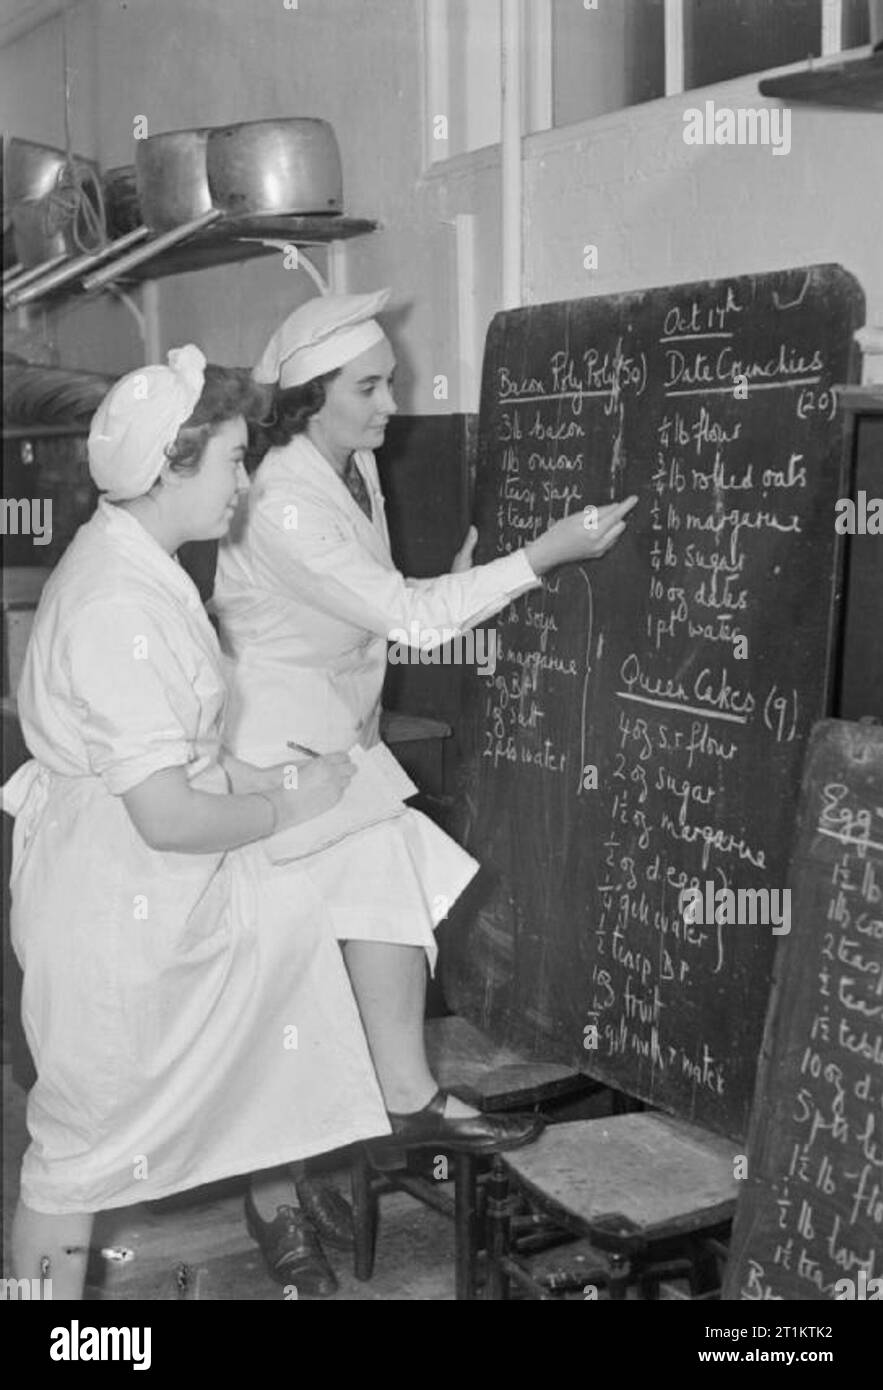 They Train To Be Cooks- Cookery Classes at the National Training College of Domestic Science, Westminster, London, England, UK, 1944 Upon arrival at the National Training College of Domestic Science at 8:30am, a student (left) takes down the day's menu from the blackboard in her notebook, as the instructor points to a particular ingredient. The recipes are for bacon roly poly (to serve 50), date crunchies (to serve 20) and queen cakes (to make 9). Stock Photo